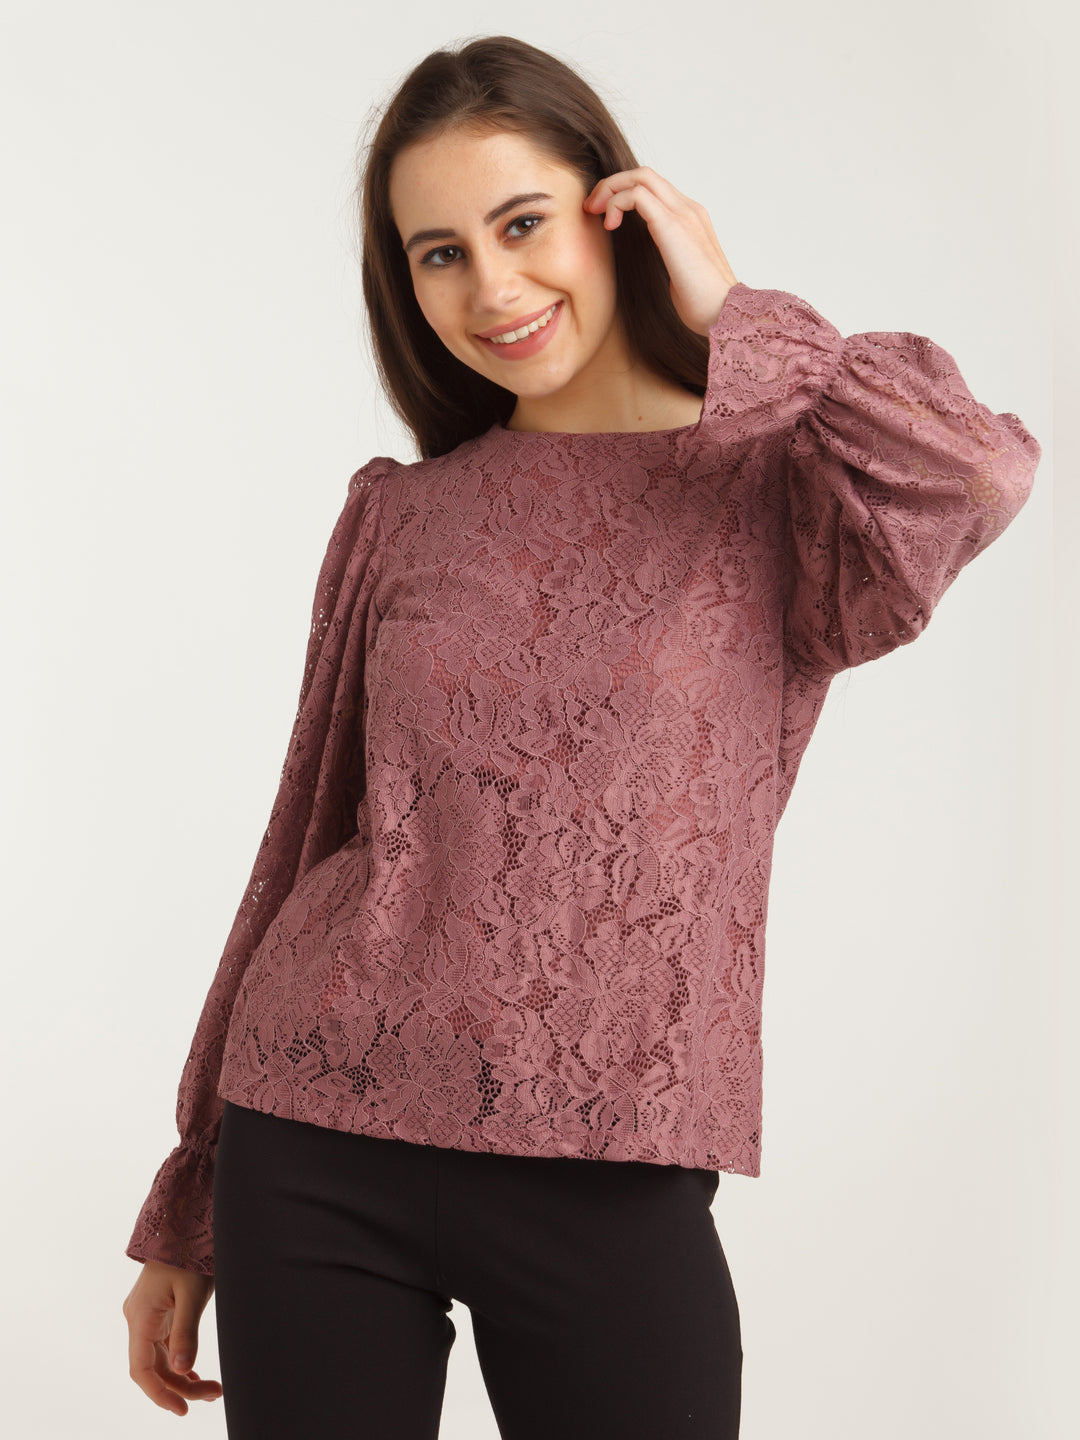 Pink Lace Top For Women